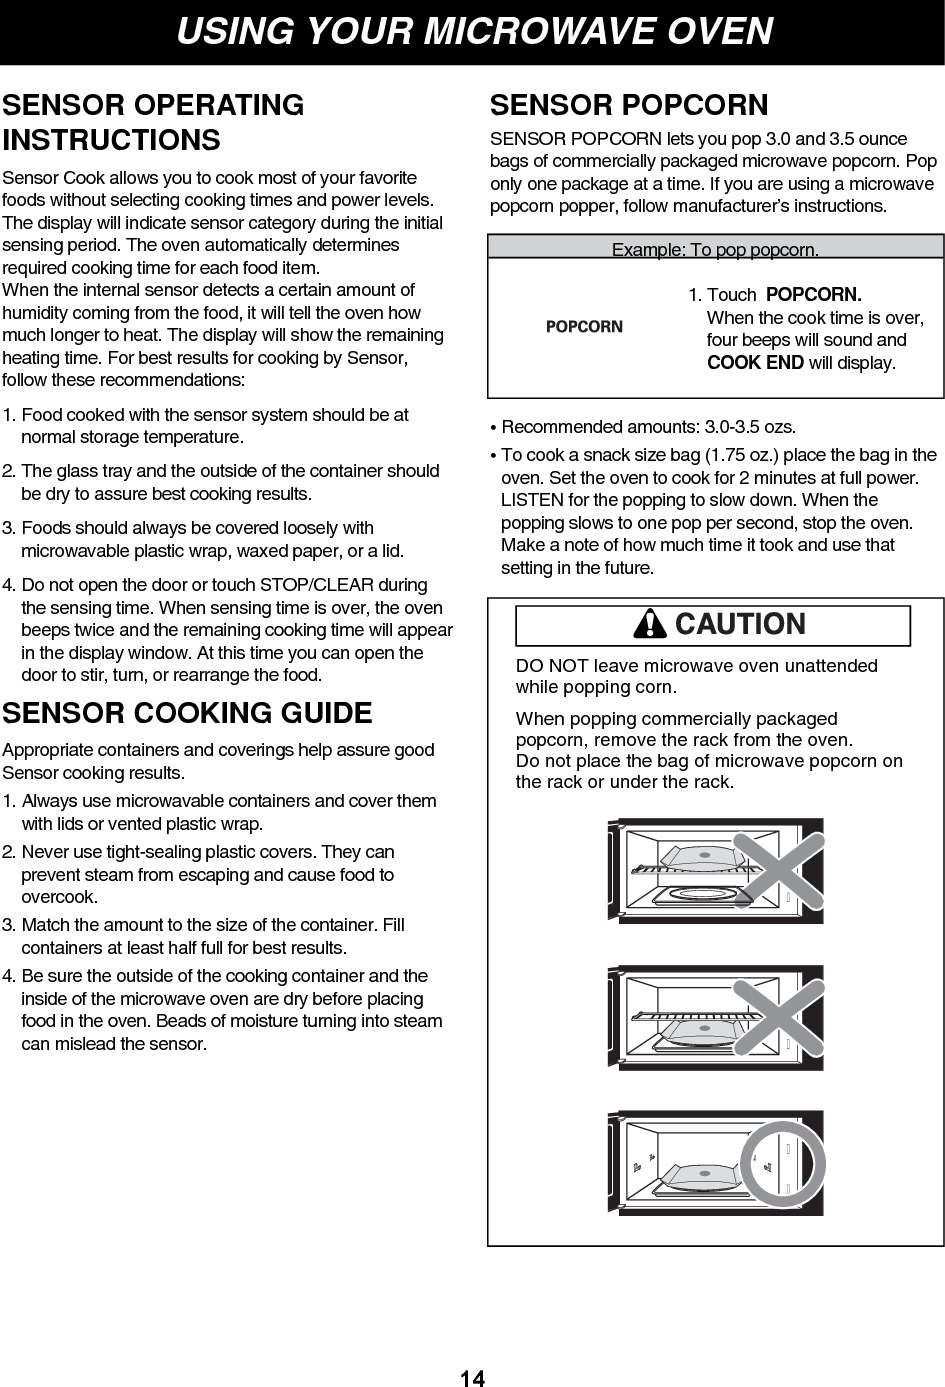 USING YOUR MICROWAVE OVEN14DO NOT leave microwave oven unattendedwhile popping corn.When popping commercially packagedpopcorn, remove the rack from the oven. Do not place the bag of microwave popcorn onthe rack or under the rack.Example: To pop popcorn.1. Touch  POPCORN. When the cook time is over,four beeps will sound andCOOK END will display.SENSOR POPCORN lets you pop 3.0 and 3.5 ouncebags of commercially packaged microwave popcorn. Poponly one package at a time. If you are using a microwavepopcorn popper, follow manufacturer’s instructions.• Recommended amounts: 3.0-3.5 ozs.• To cook a snack size bag (1.75 oz.) place the bag in theoven. Set the oven to cook for 2 minutes at full power.LISTEN for the popping to slow down. When thepopping slows to one pop per second, stop the oven.Make a note of how much time it took and use thatsetting in the future.SENSOR POPCORNSENSOR OPERATINGINSTRUCTIONSSensor Cook allows you to cook most of your favoritefoods without selecting cooking times and power levels.The display will indicate sensor category during the initialsensing period. The oven automatically determinesrequired cooking time for each food item.When the internal sensor detects a certain amount ofhumidity coming from the food, it will tell the oven howmuch longer to heat. The display will show the remainingheating time. For best results for cooking by Sensor,follow these recommendations:1. Food cooked with the sensor system should be atnormal storage temperature.2. The glass tray and the outside of the container shouldbe dry to assure best cooking results.3. Foods should always be covered loosely withmicrowavable plastic wrap, waxed paper, or a lid.4. Do not open the door or touch STOP/CLEAR duringthe sensing time. When sensing time is over, the ovenbeeps twice and the remaining cooking time will appearin the display window. At this time you can open thedoor to stir, turn, or rearrange the food.SENSOR COOKING GUIDEAppropriate containers and coverings help assure goodSensor cooking results.1. Always use microwavable containers and cover themwith lids or vented plastic wrap.2. Never use tight-sealing plastic covers. They canprevent steam from escaping and cause food toovercook.3. Match the amount to the size of the container. Fillcontainers at least half full for best results.4. Be sure the outside of the cooking container and theinside of the microwave oven are dry before placingfood in the oven. Beads of moisture turning into steamcan mislead the sensor.